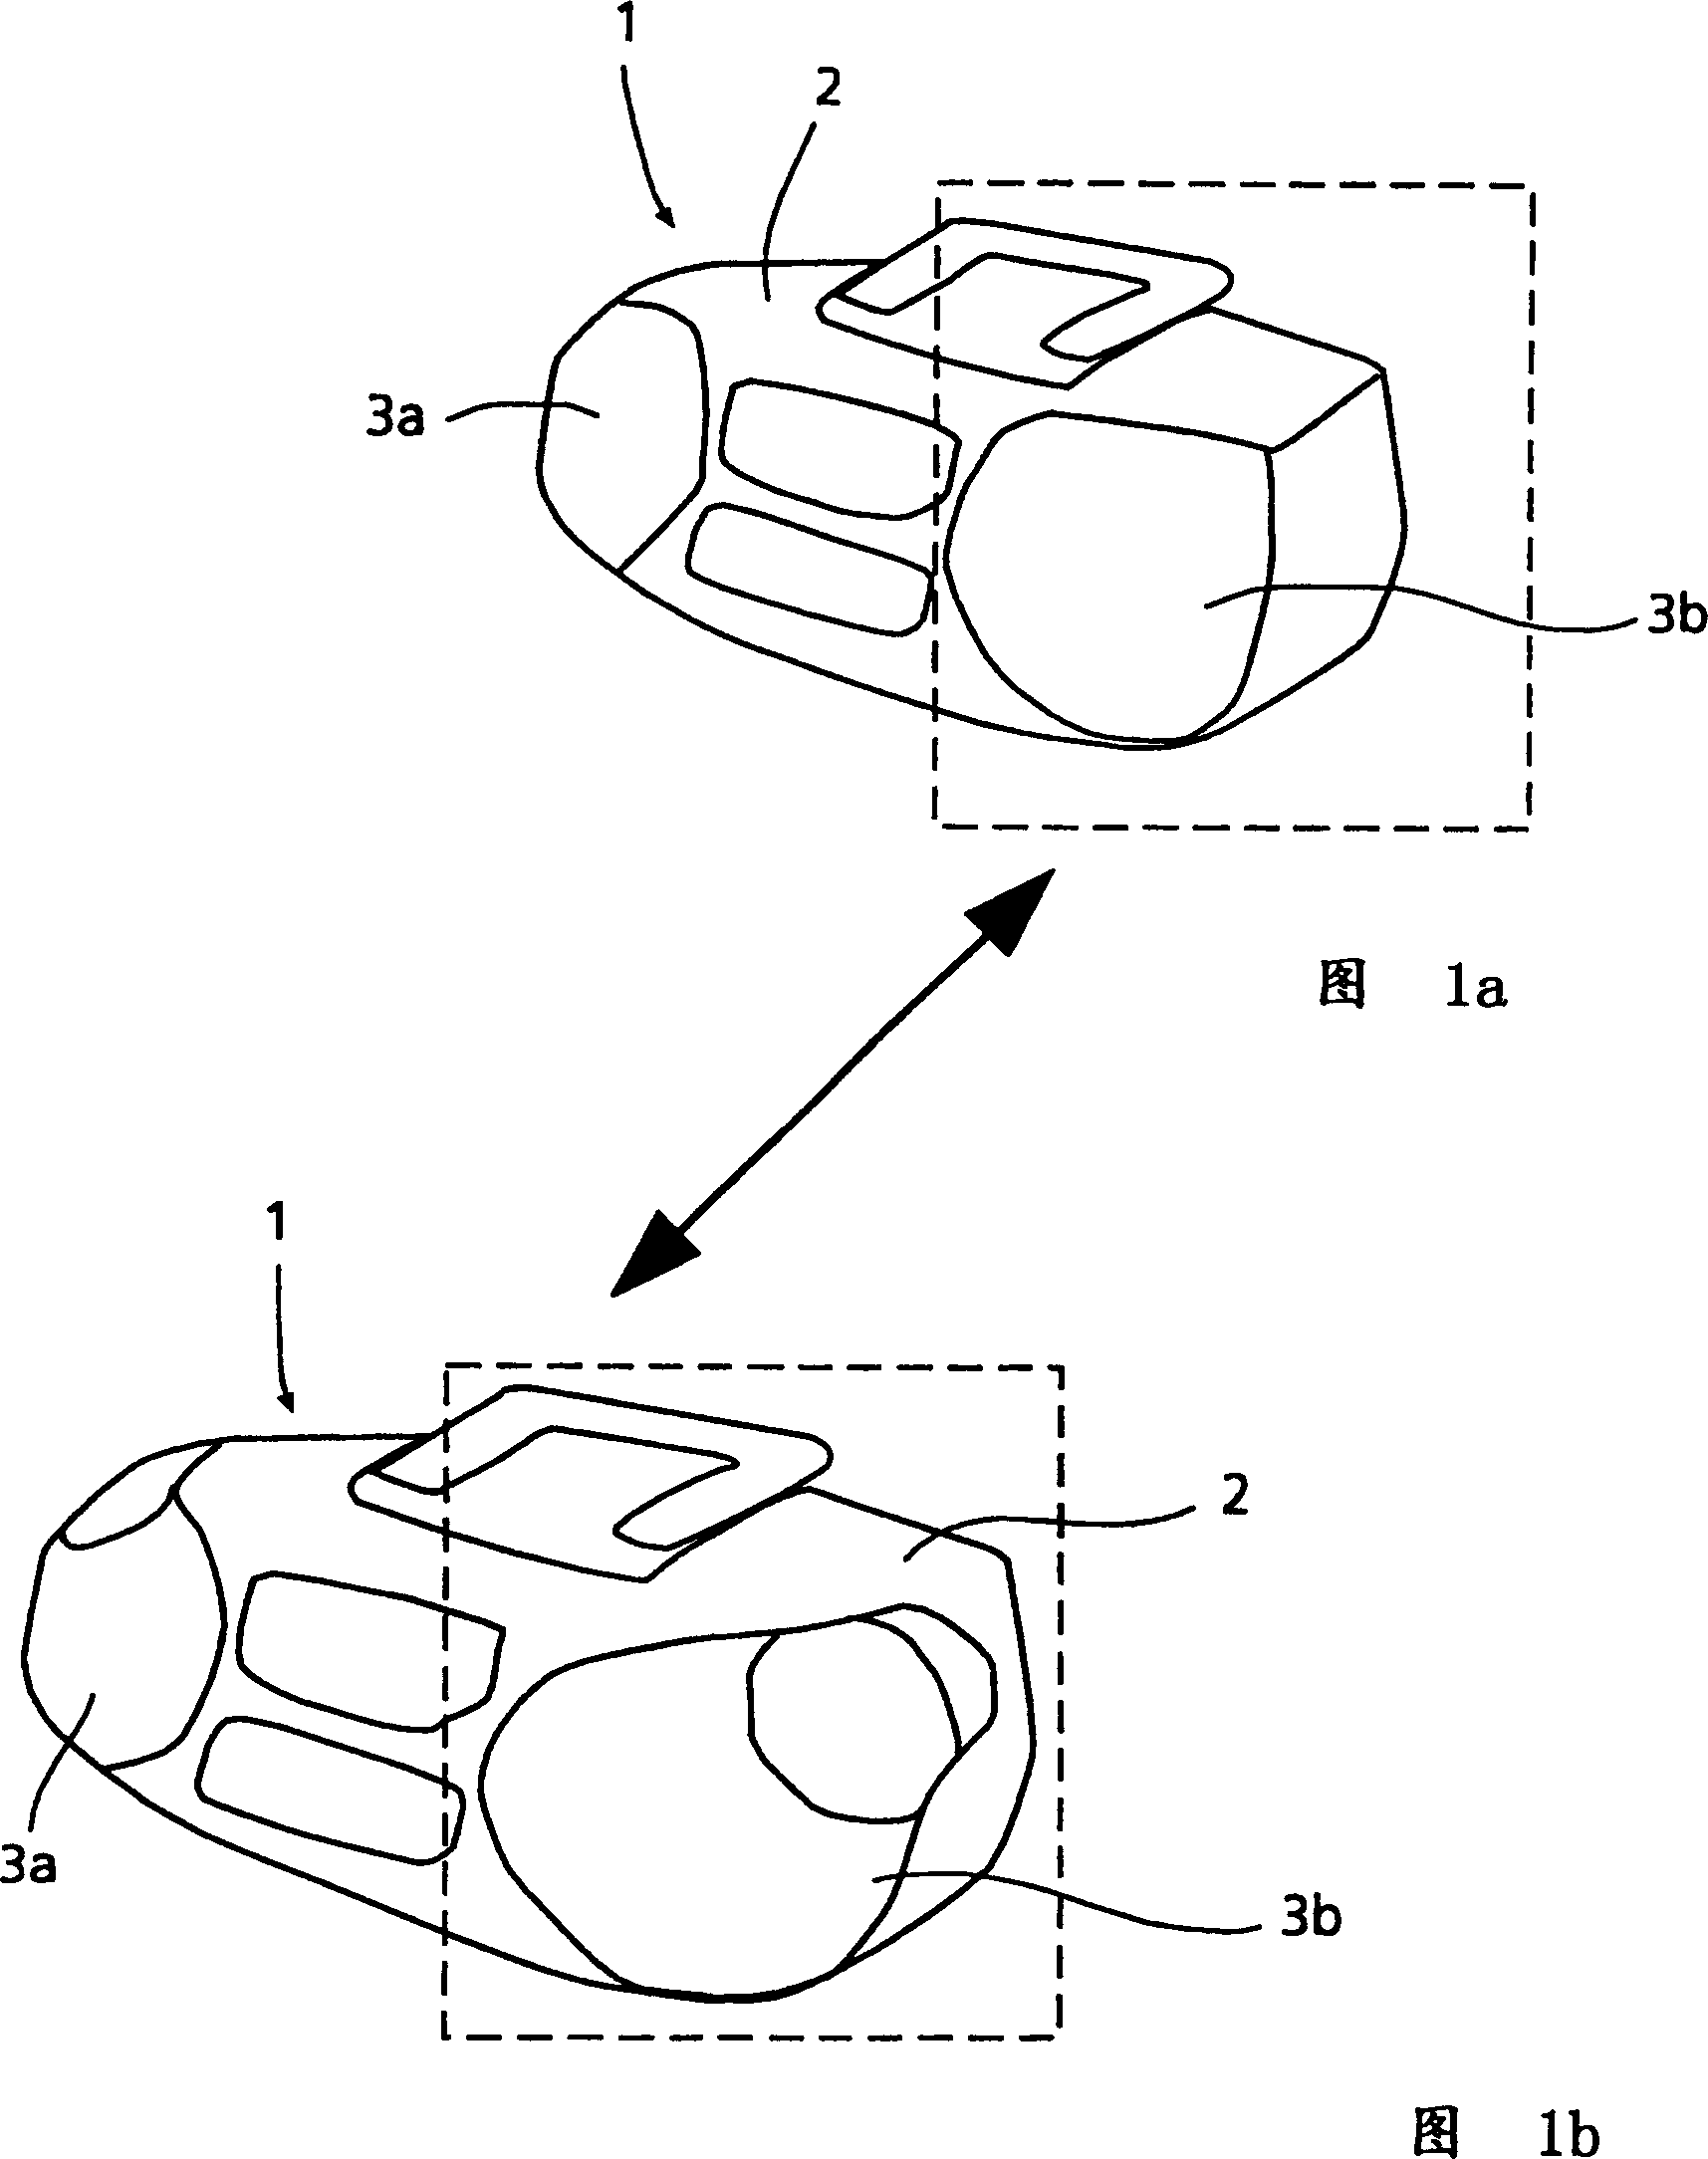 Casing of audio device